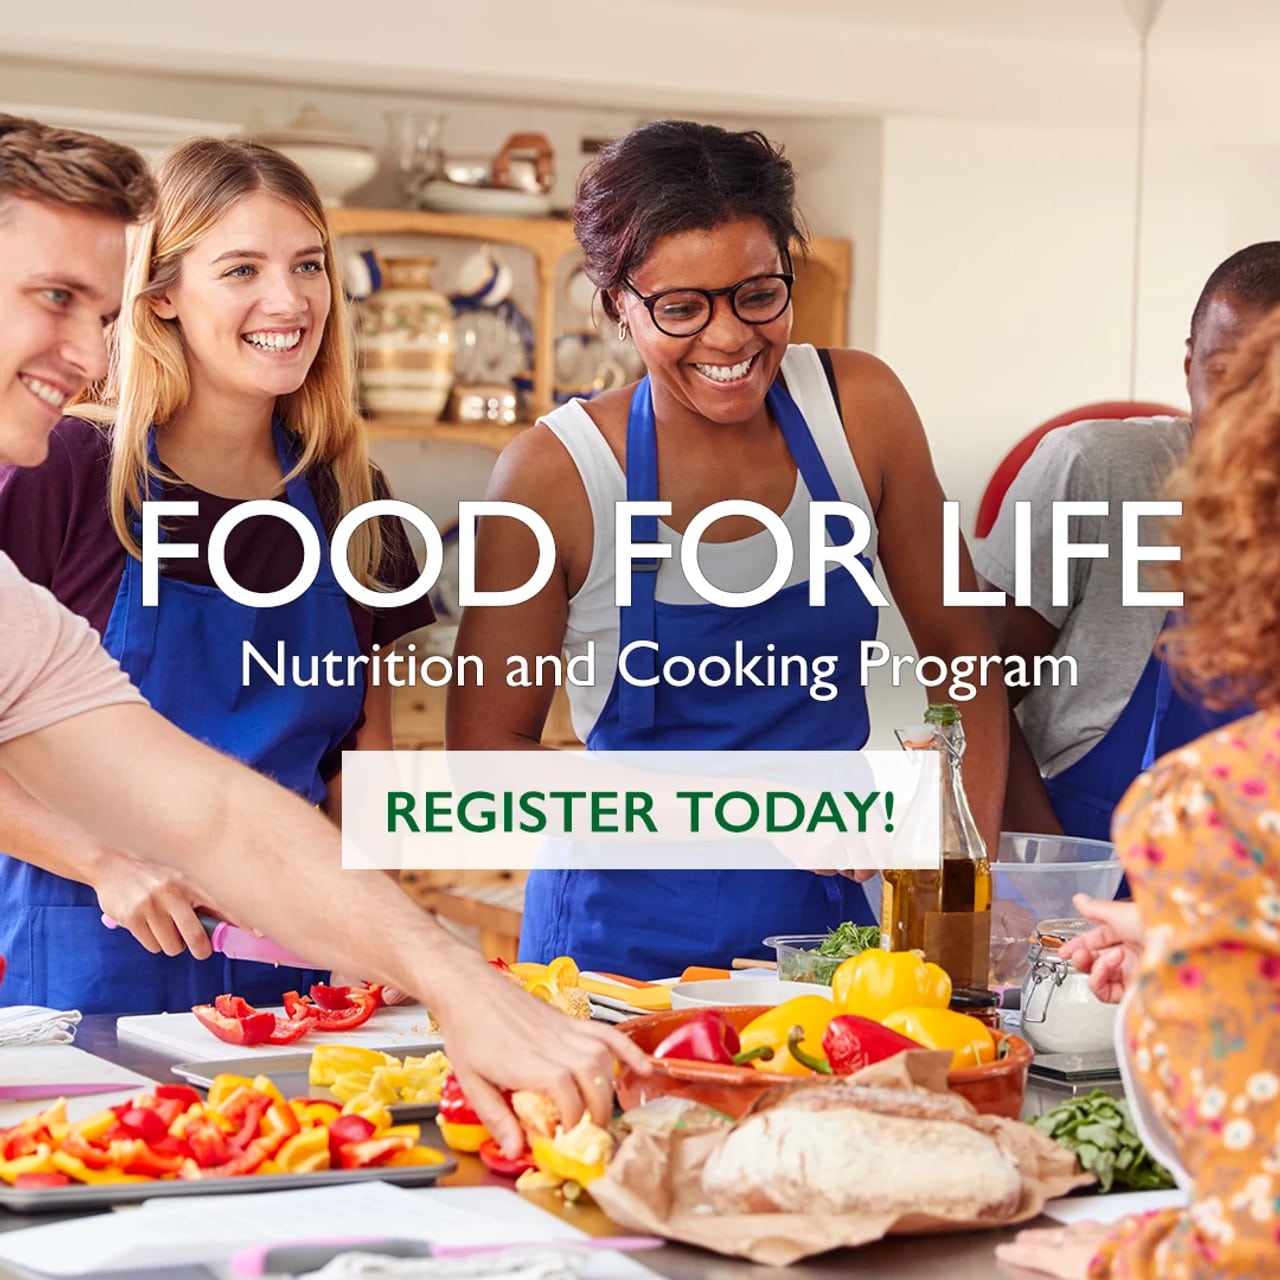 Food for life classes